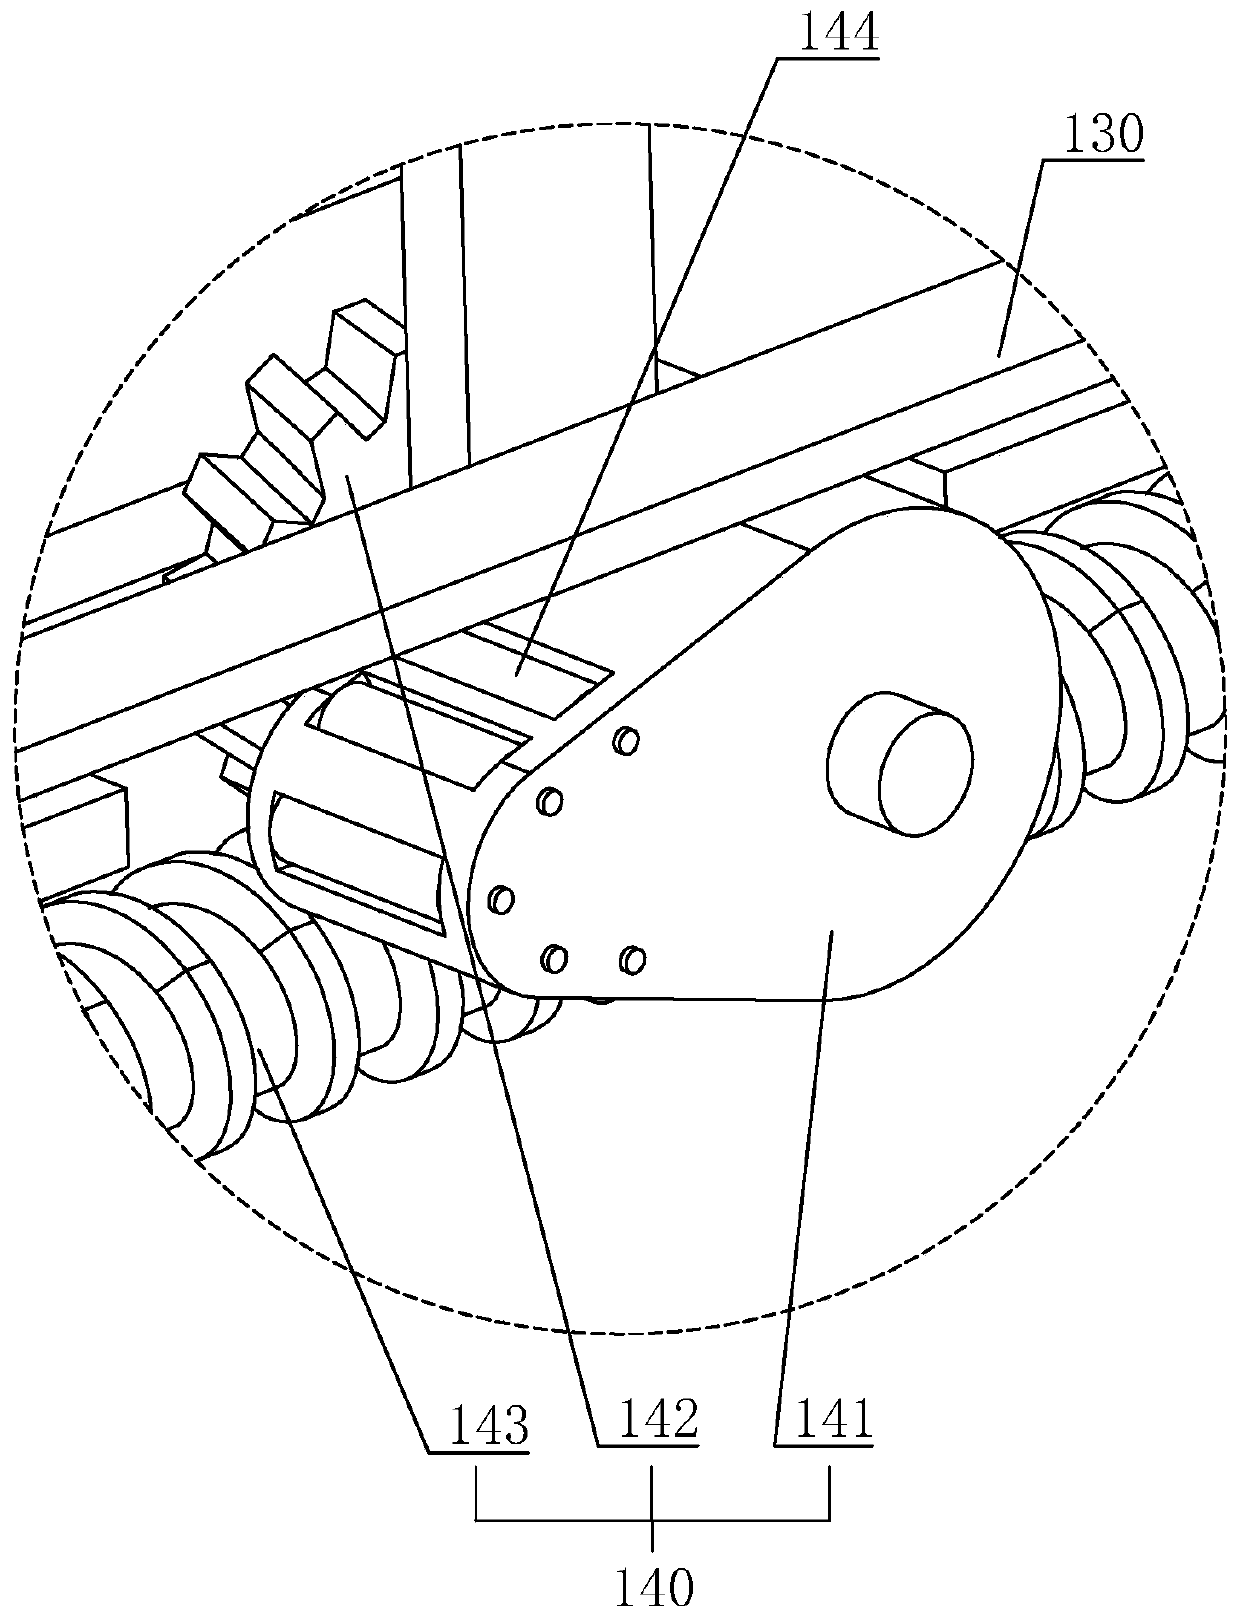 Band knife structure of nap cutting machine